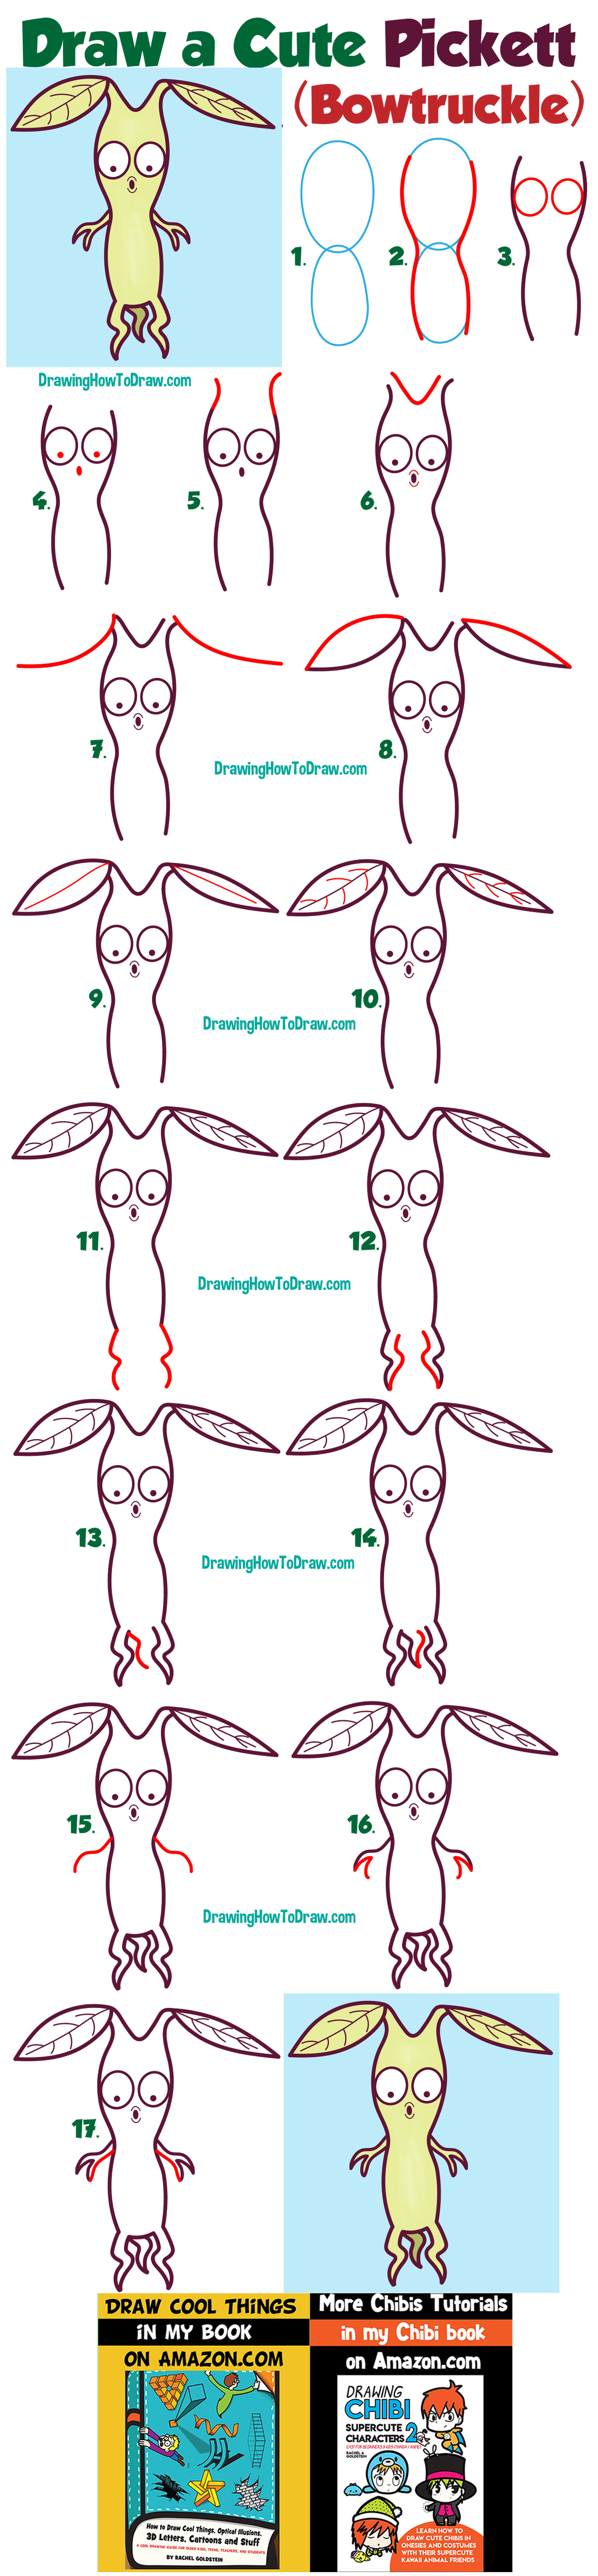 how to draw Pickett and bowtruckle from fantastic beasts